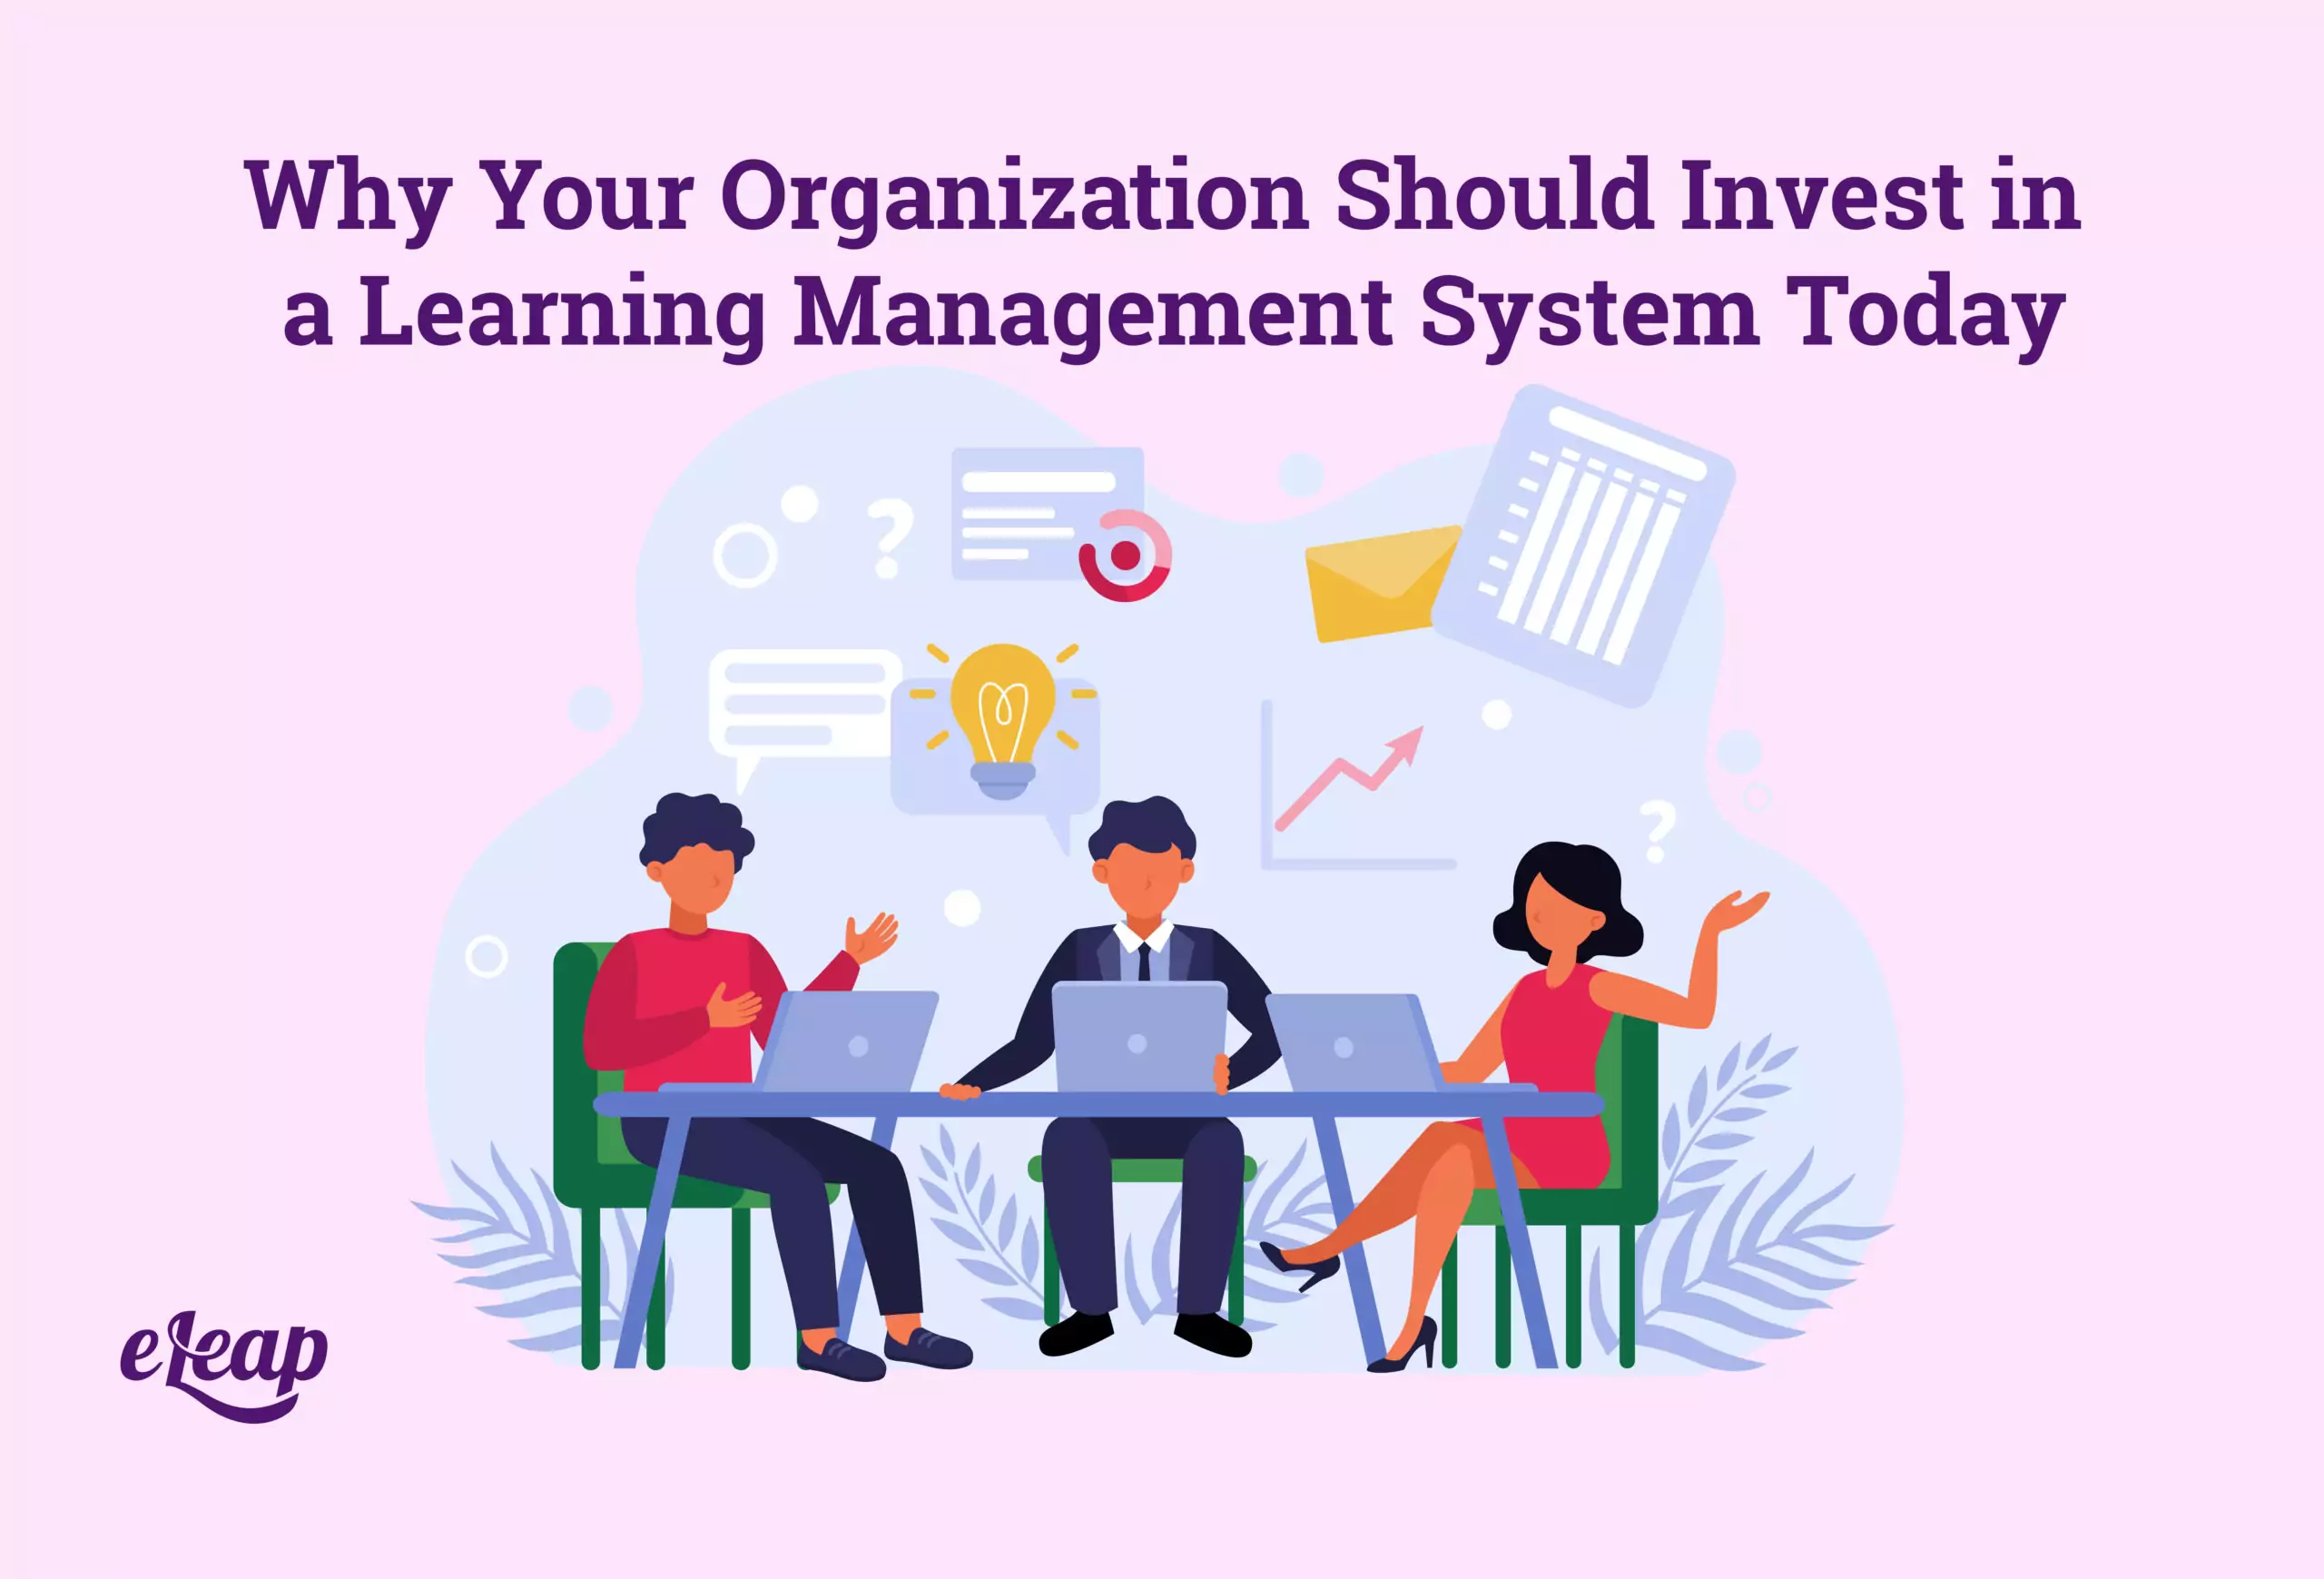 Why Your Organization Should Invest in a Learning Management System Today